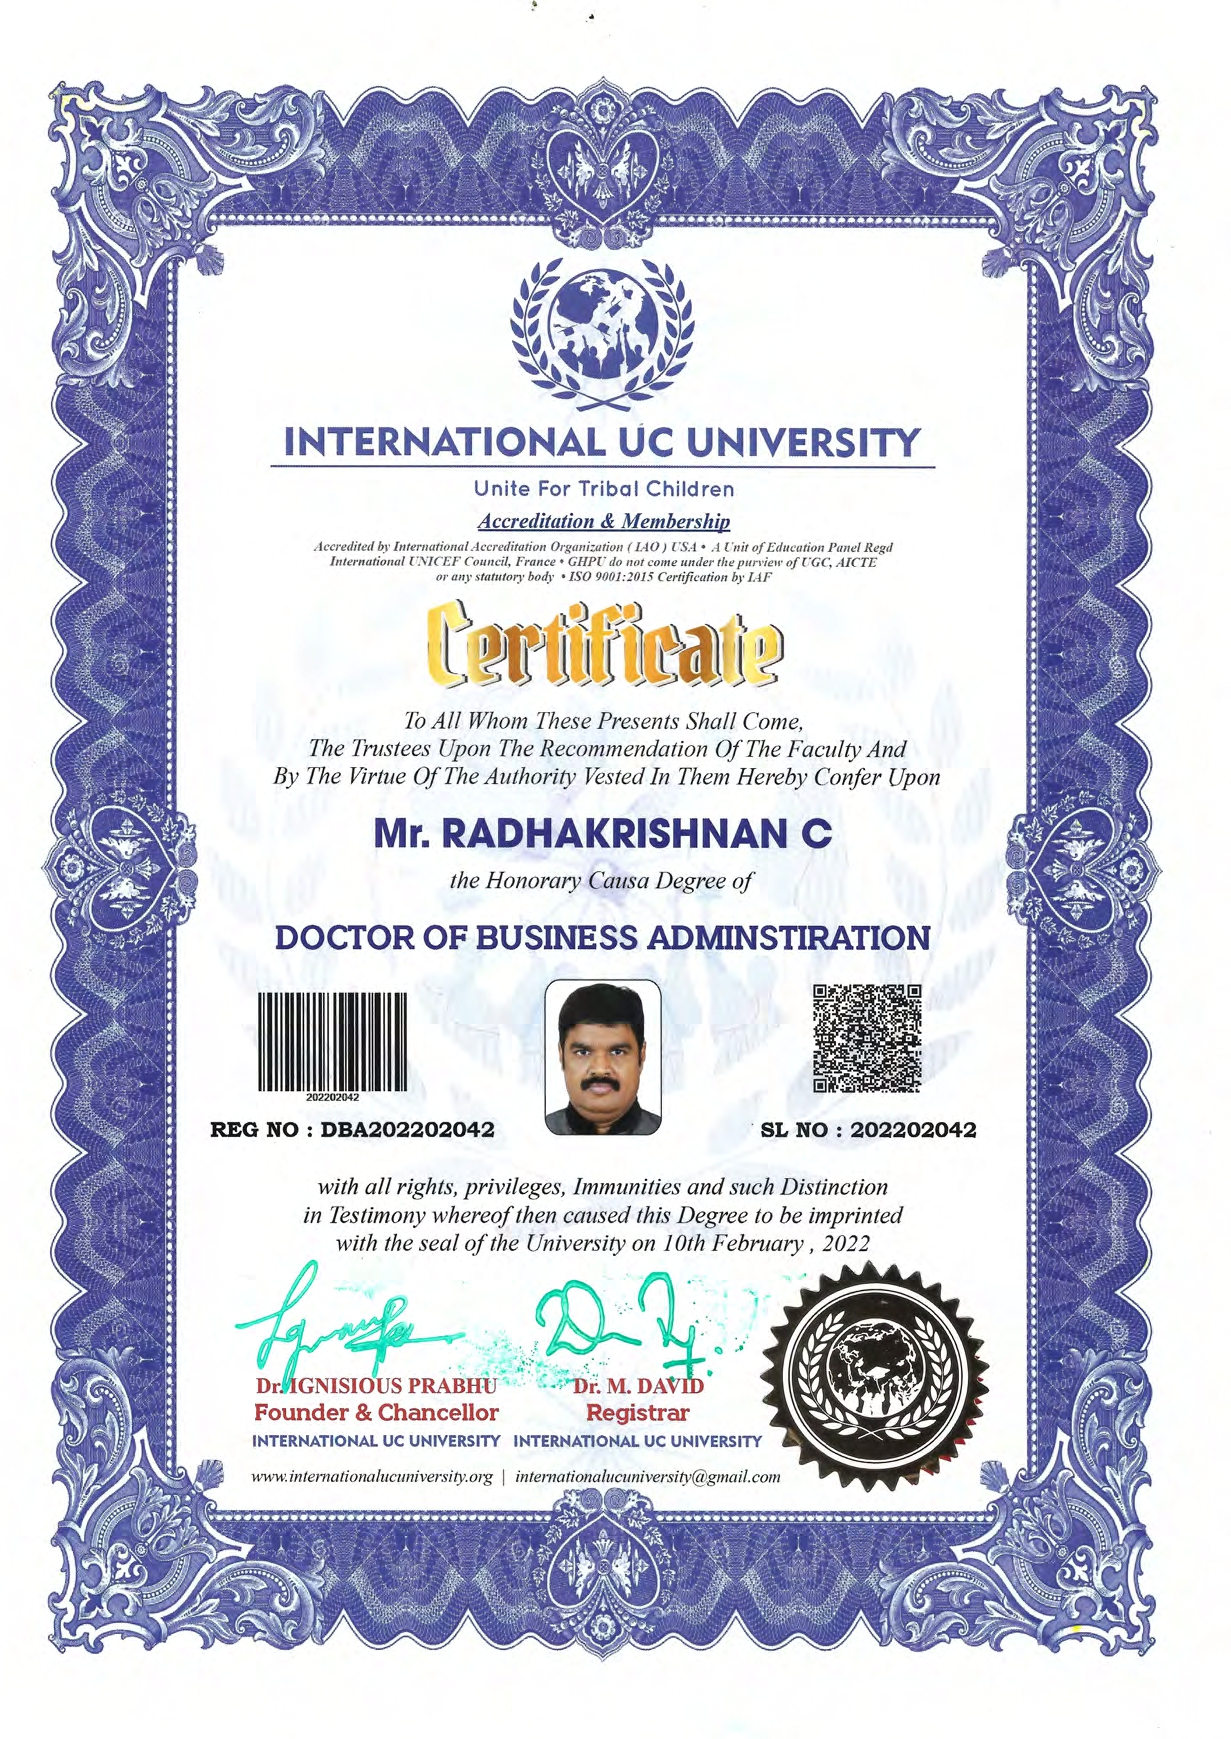 RK Sir All Certificates c 7-page-00001